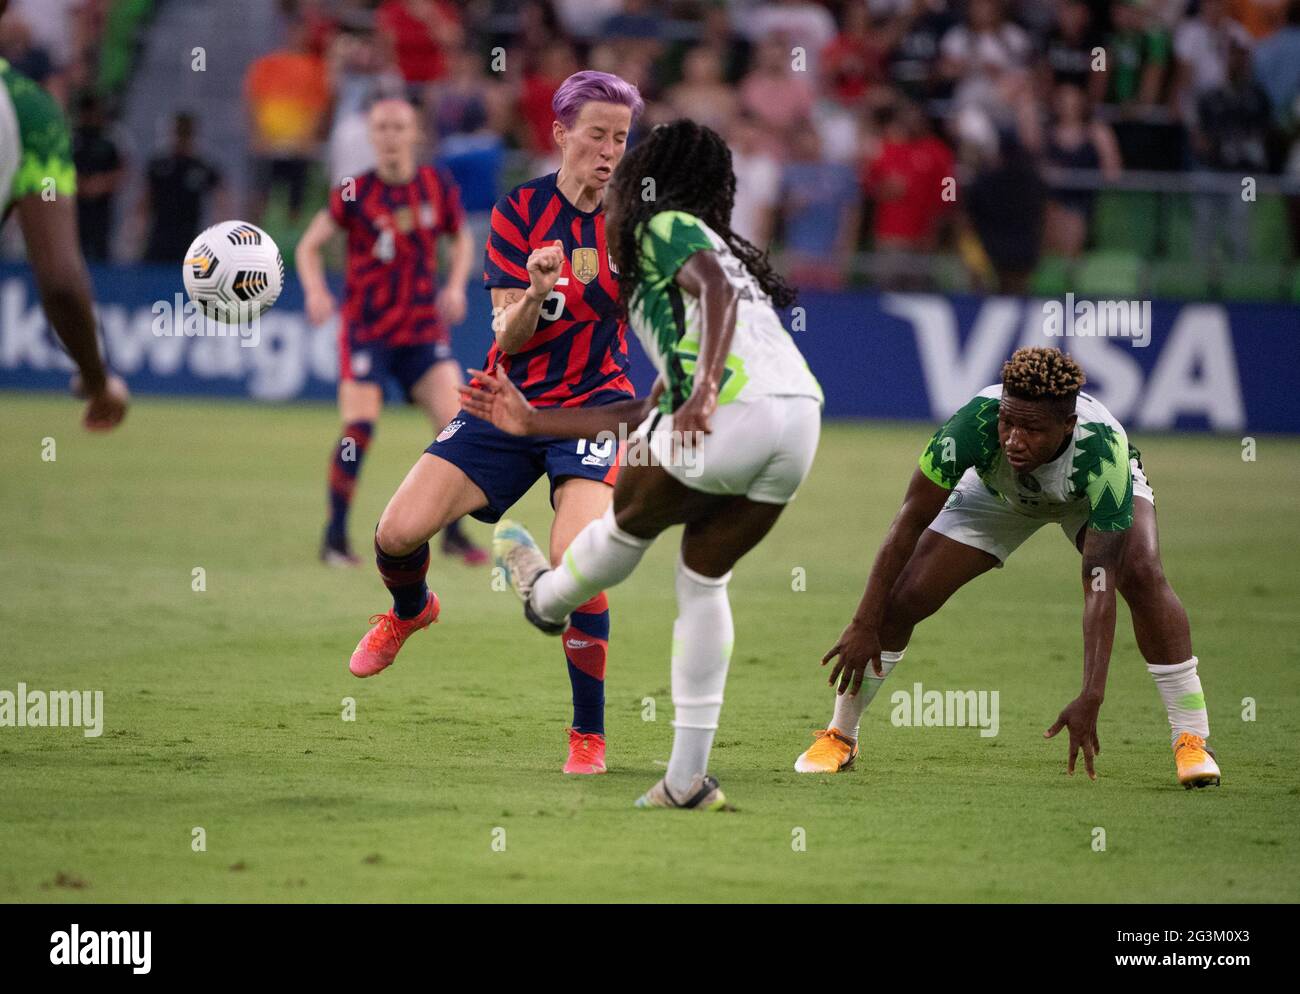 USA forward MEGAN RAPINOE (15) challenges RITA CHIKWELU (10) and MICHELLE ALOZIE (22) of Nigeria during the second half of the US Women's National Team (USWNT) 2-0 victory over Nigeria, in the first match at Austin's Q2 Stadium. The U.S. women's team, an Olympic favorite, is wrapping up a series of summer matches to prep for the Tokyo Games. Press scored a goal in the win for USA Soccer. Credit: Bob Daemmrich/Alamy Live News Stock Photo